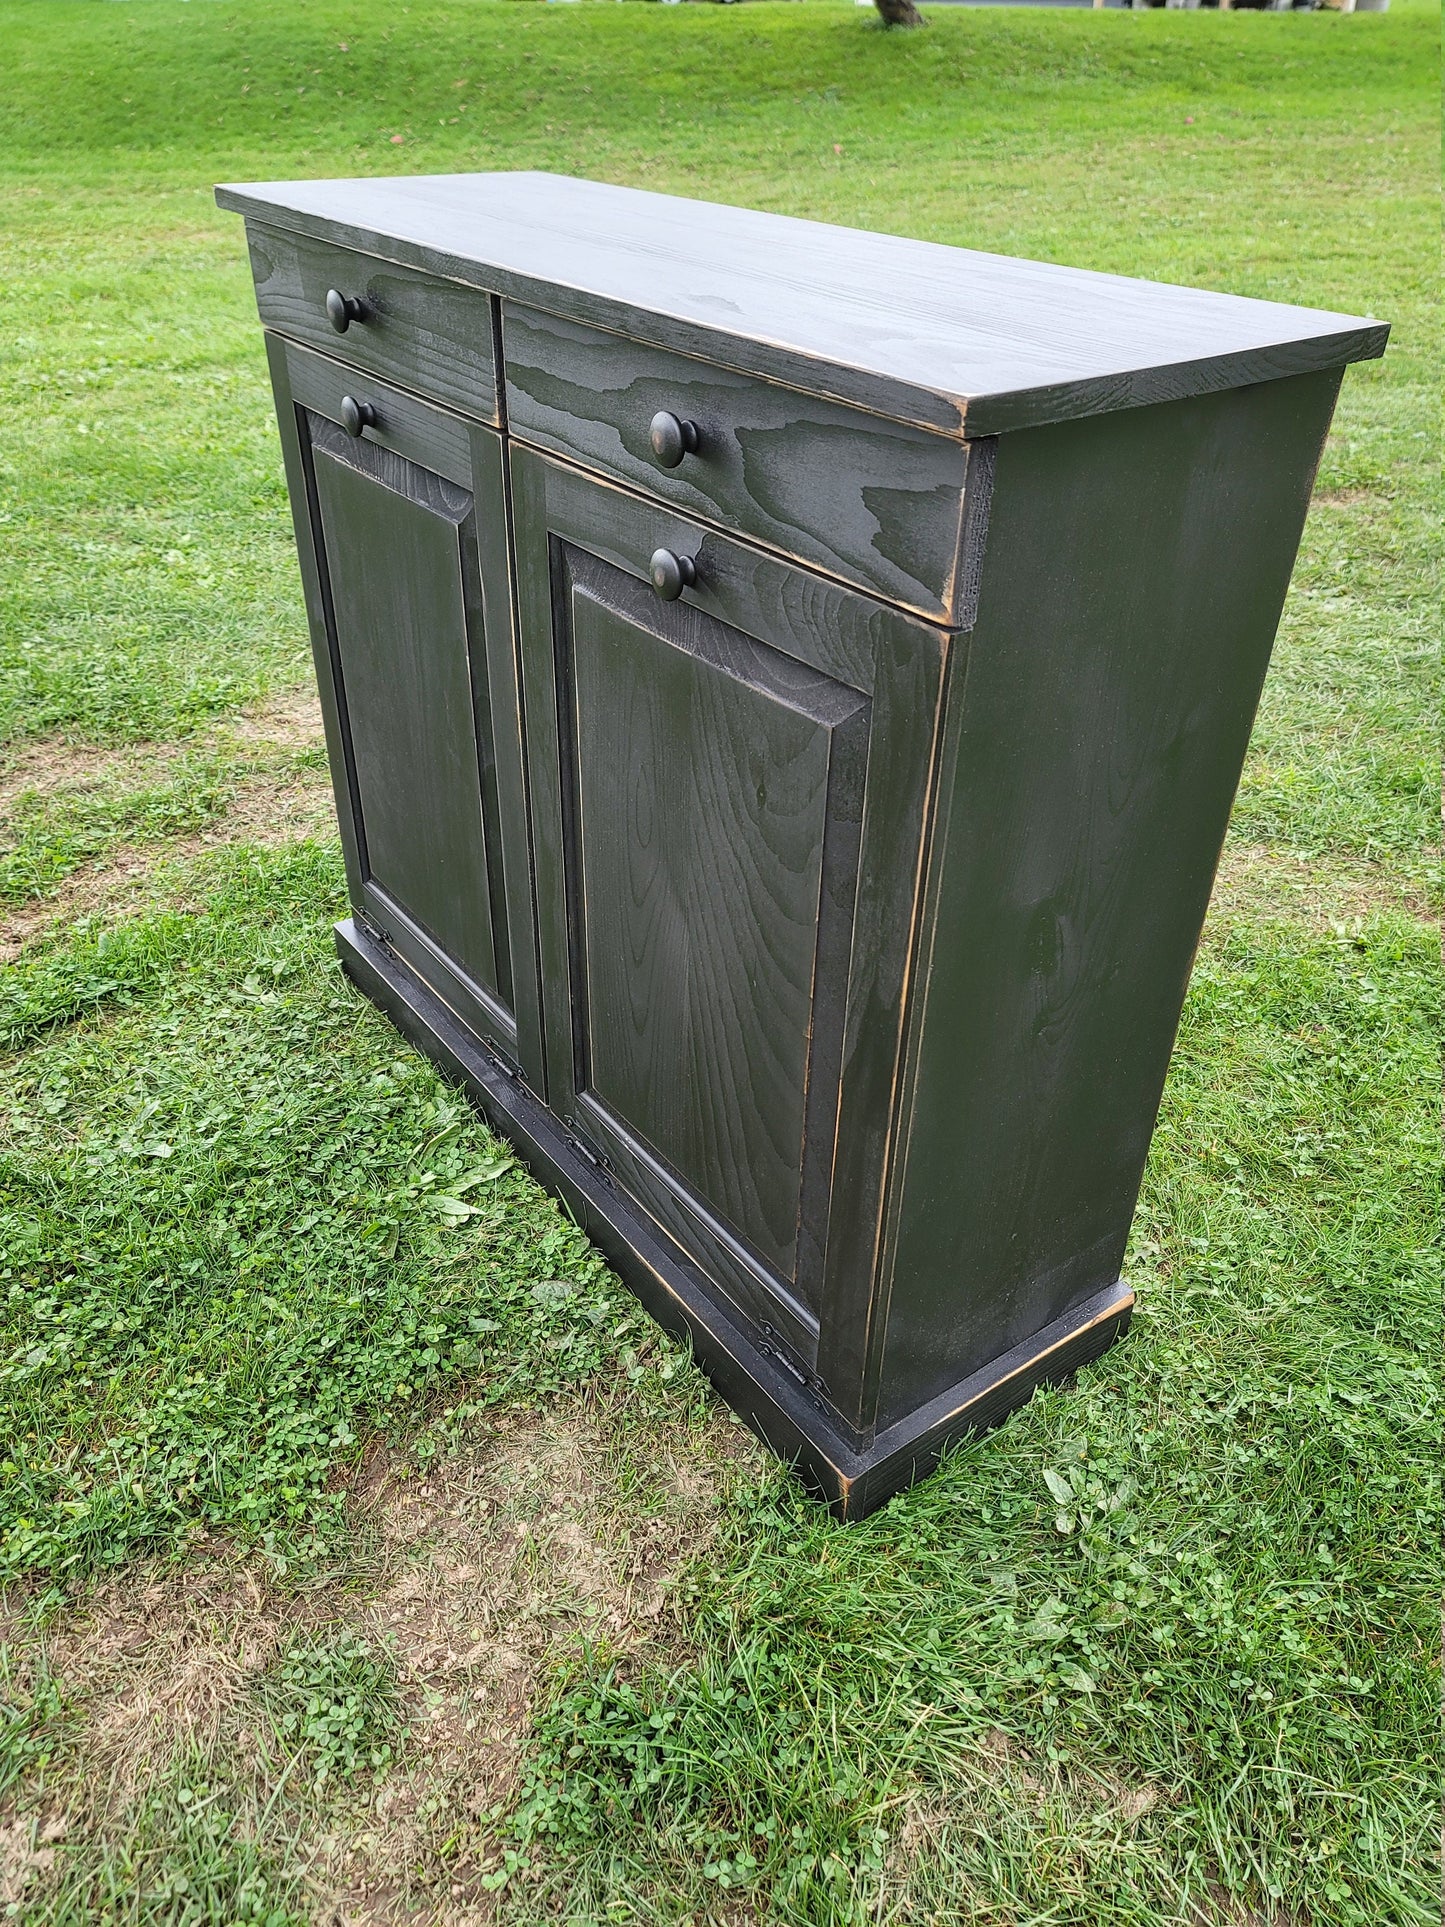 Rustic Handcrafted Double Tilt Door Trash Bin, Wooden Trash Can, Farmhouse Style Garbage Container